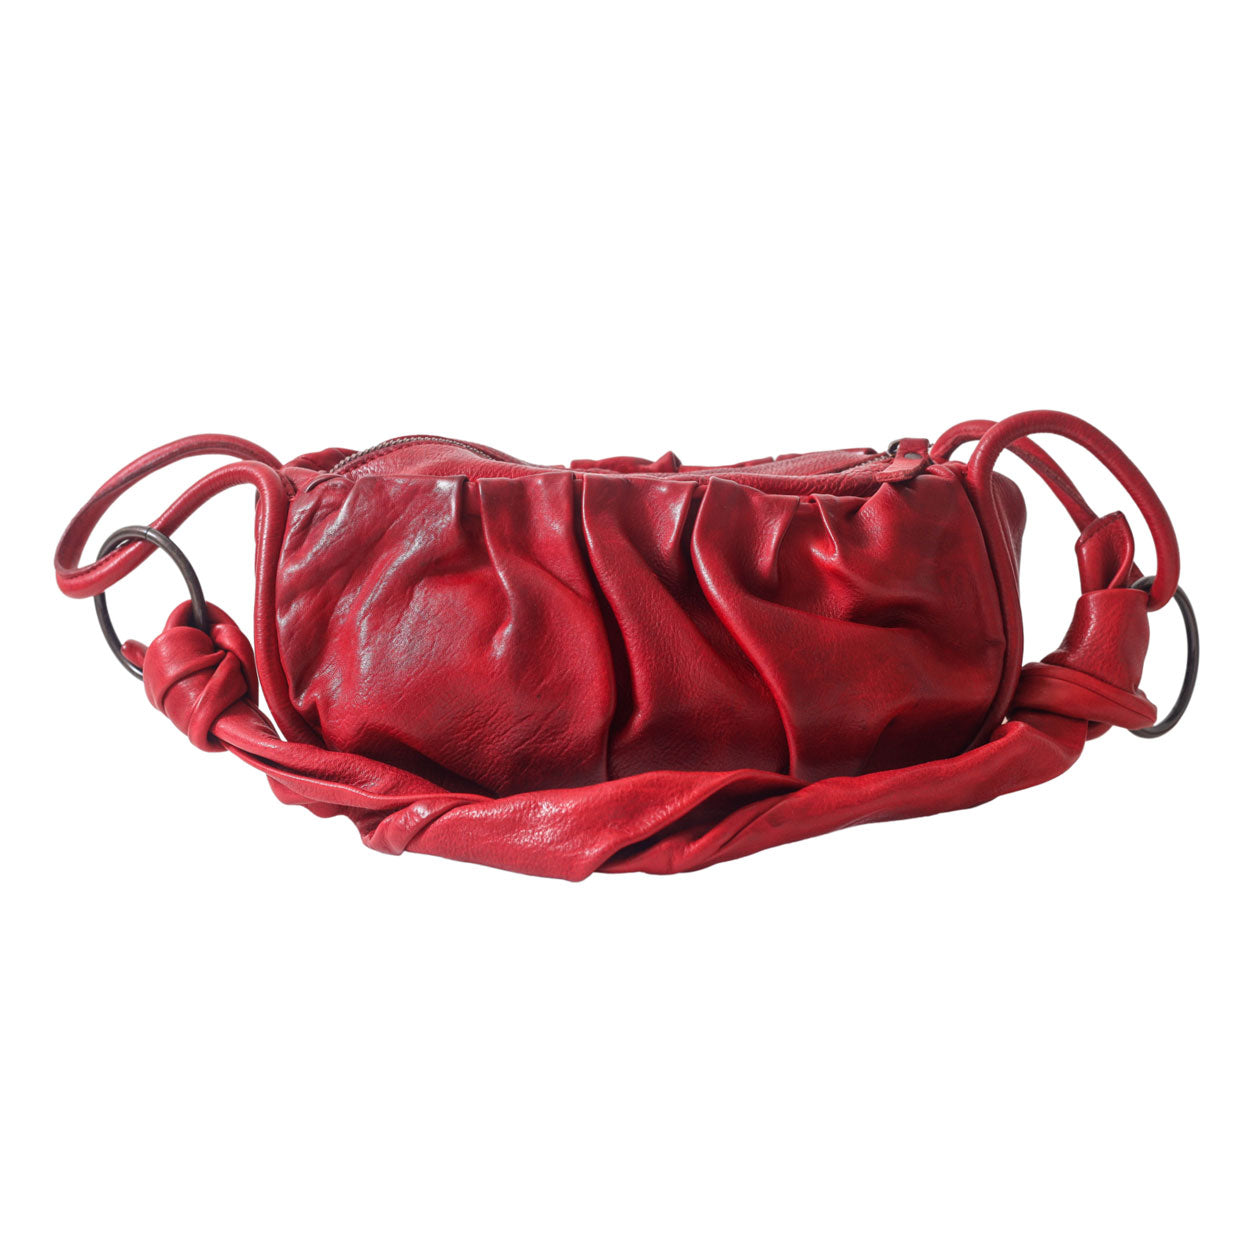 Red Leather Handbag by Never Mind